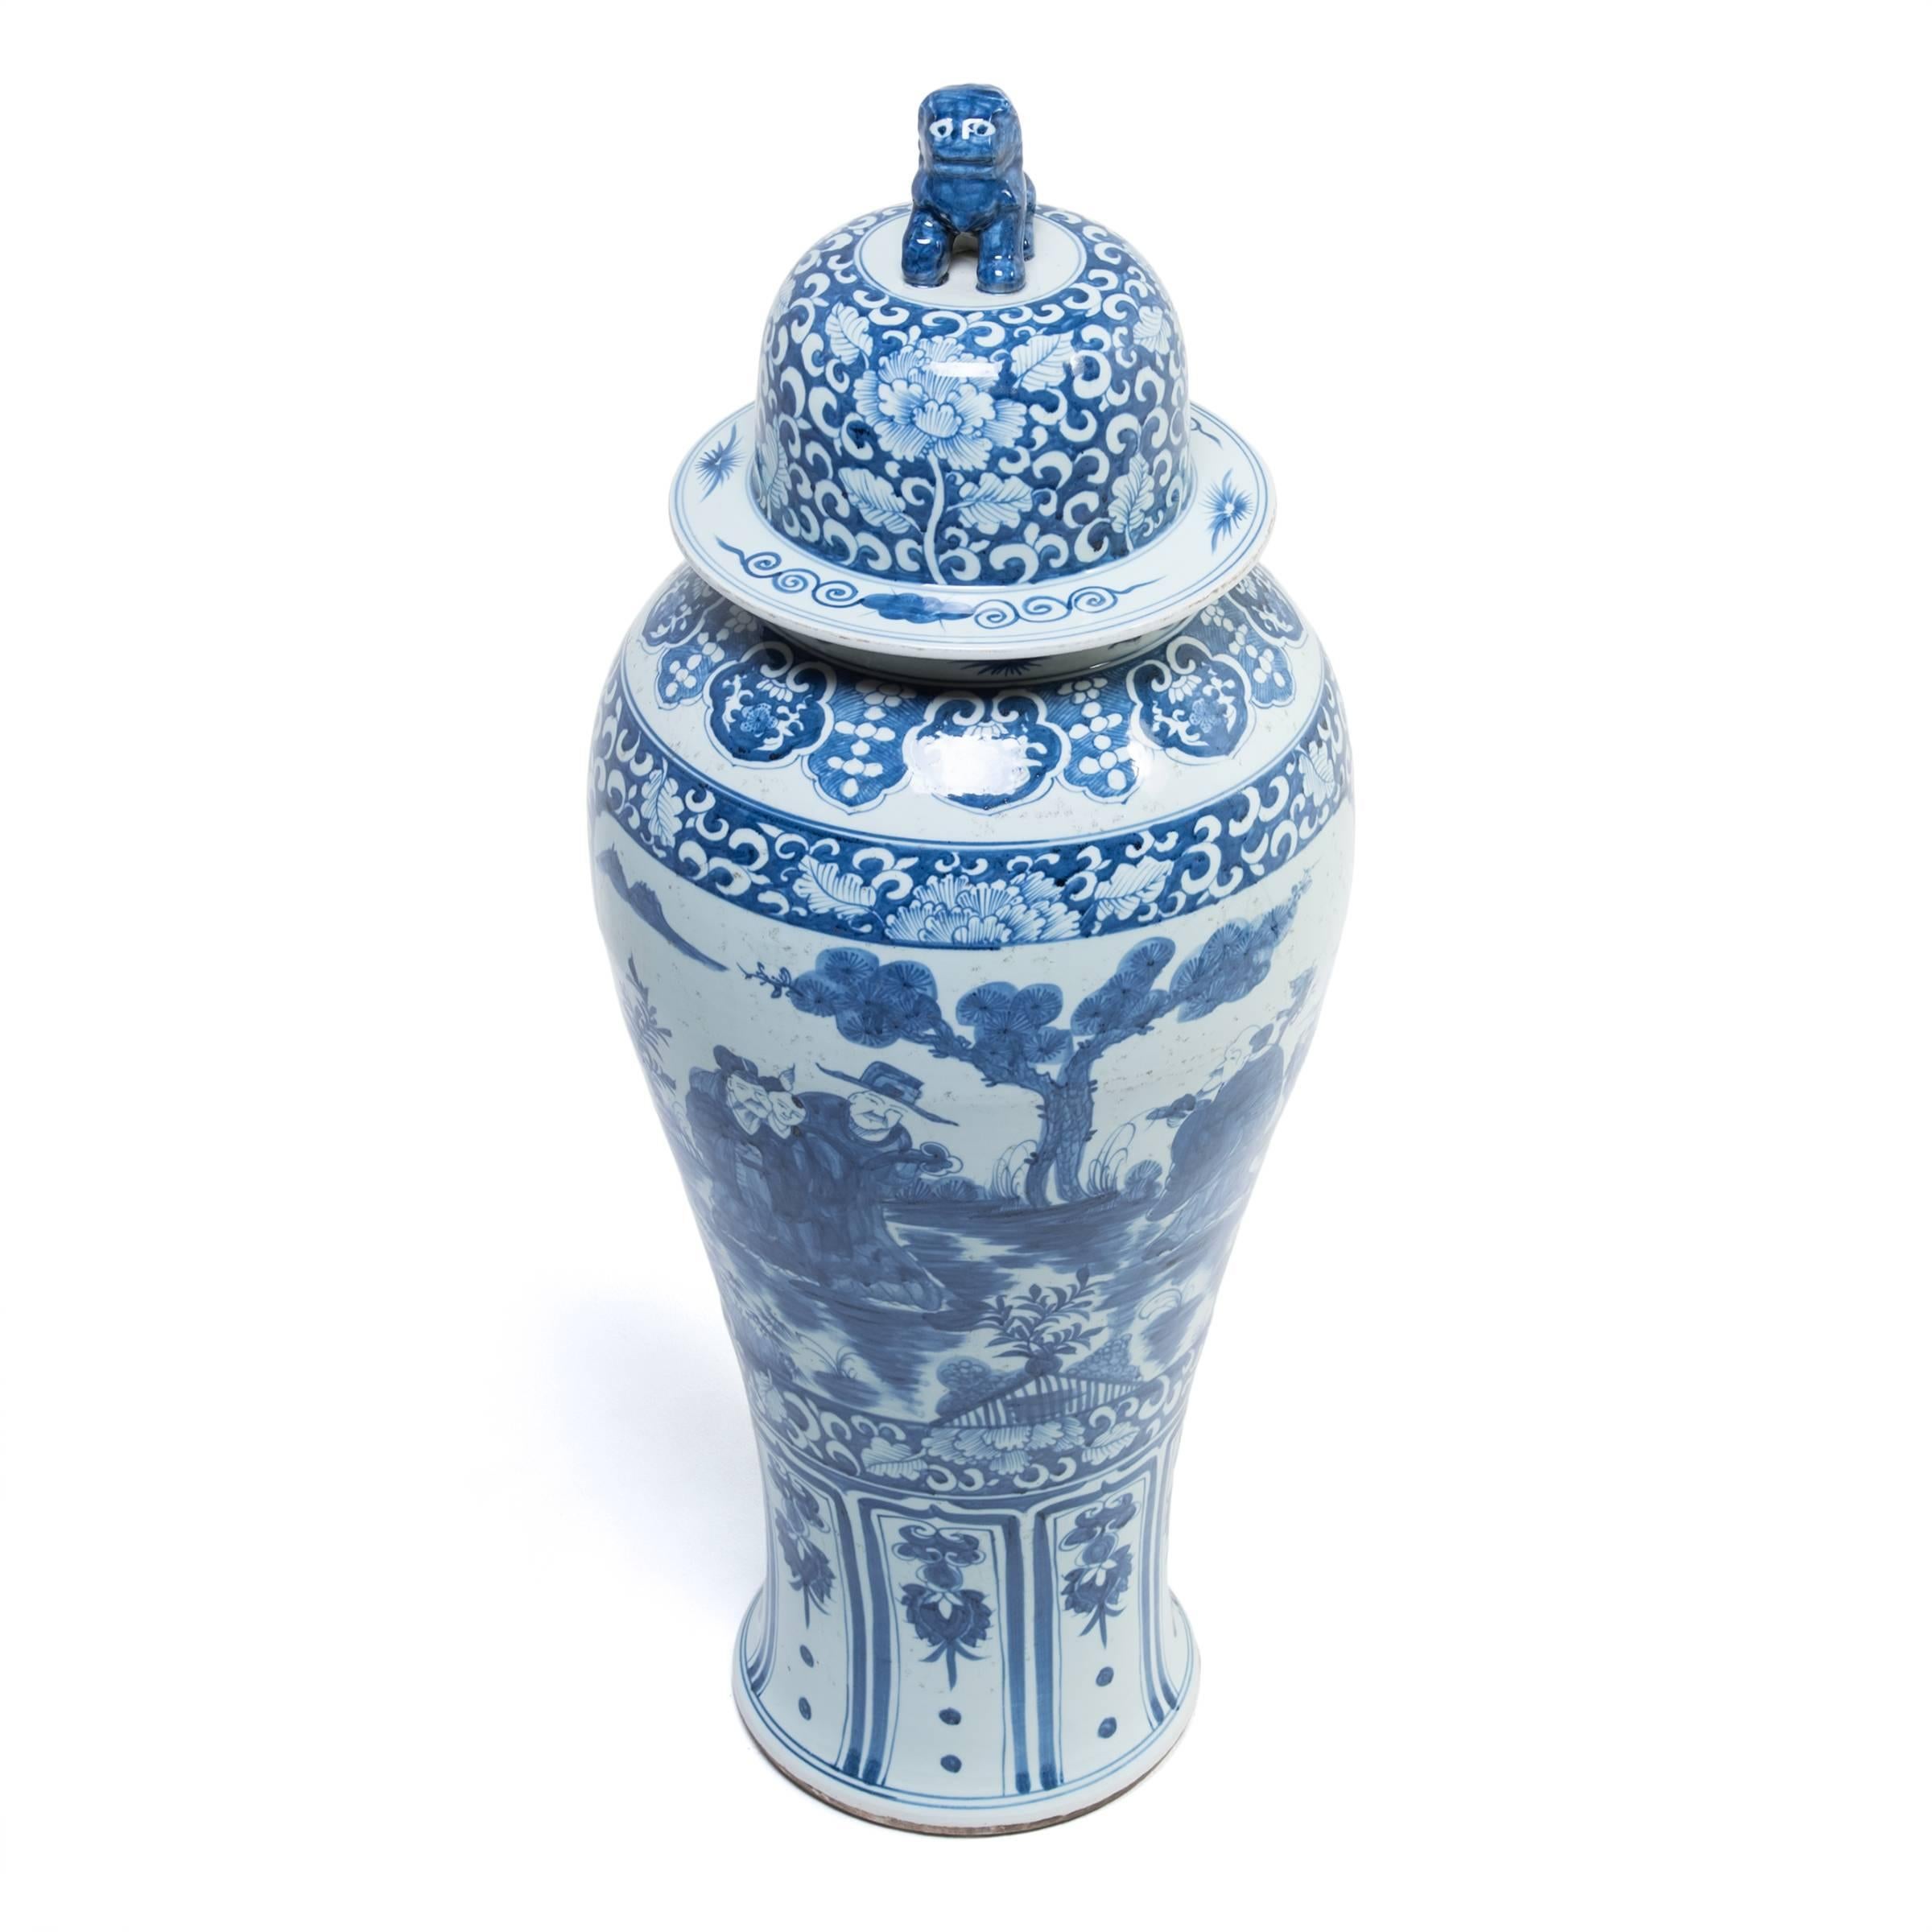 Contemporary Chinese Blue and White Ginger Jar with Shizi and Landscape Portraits